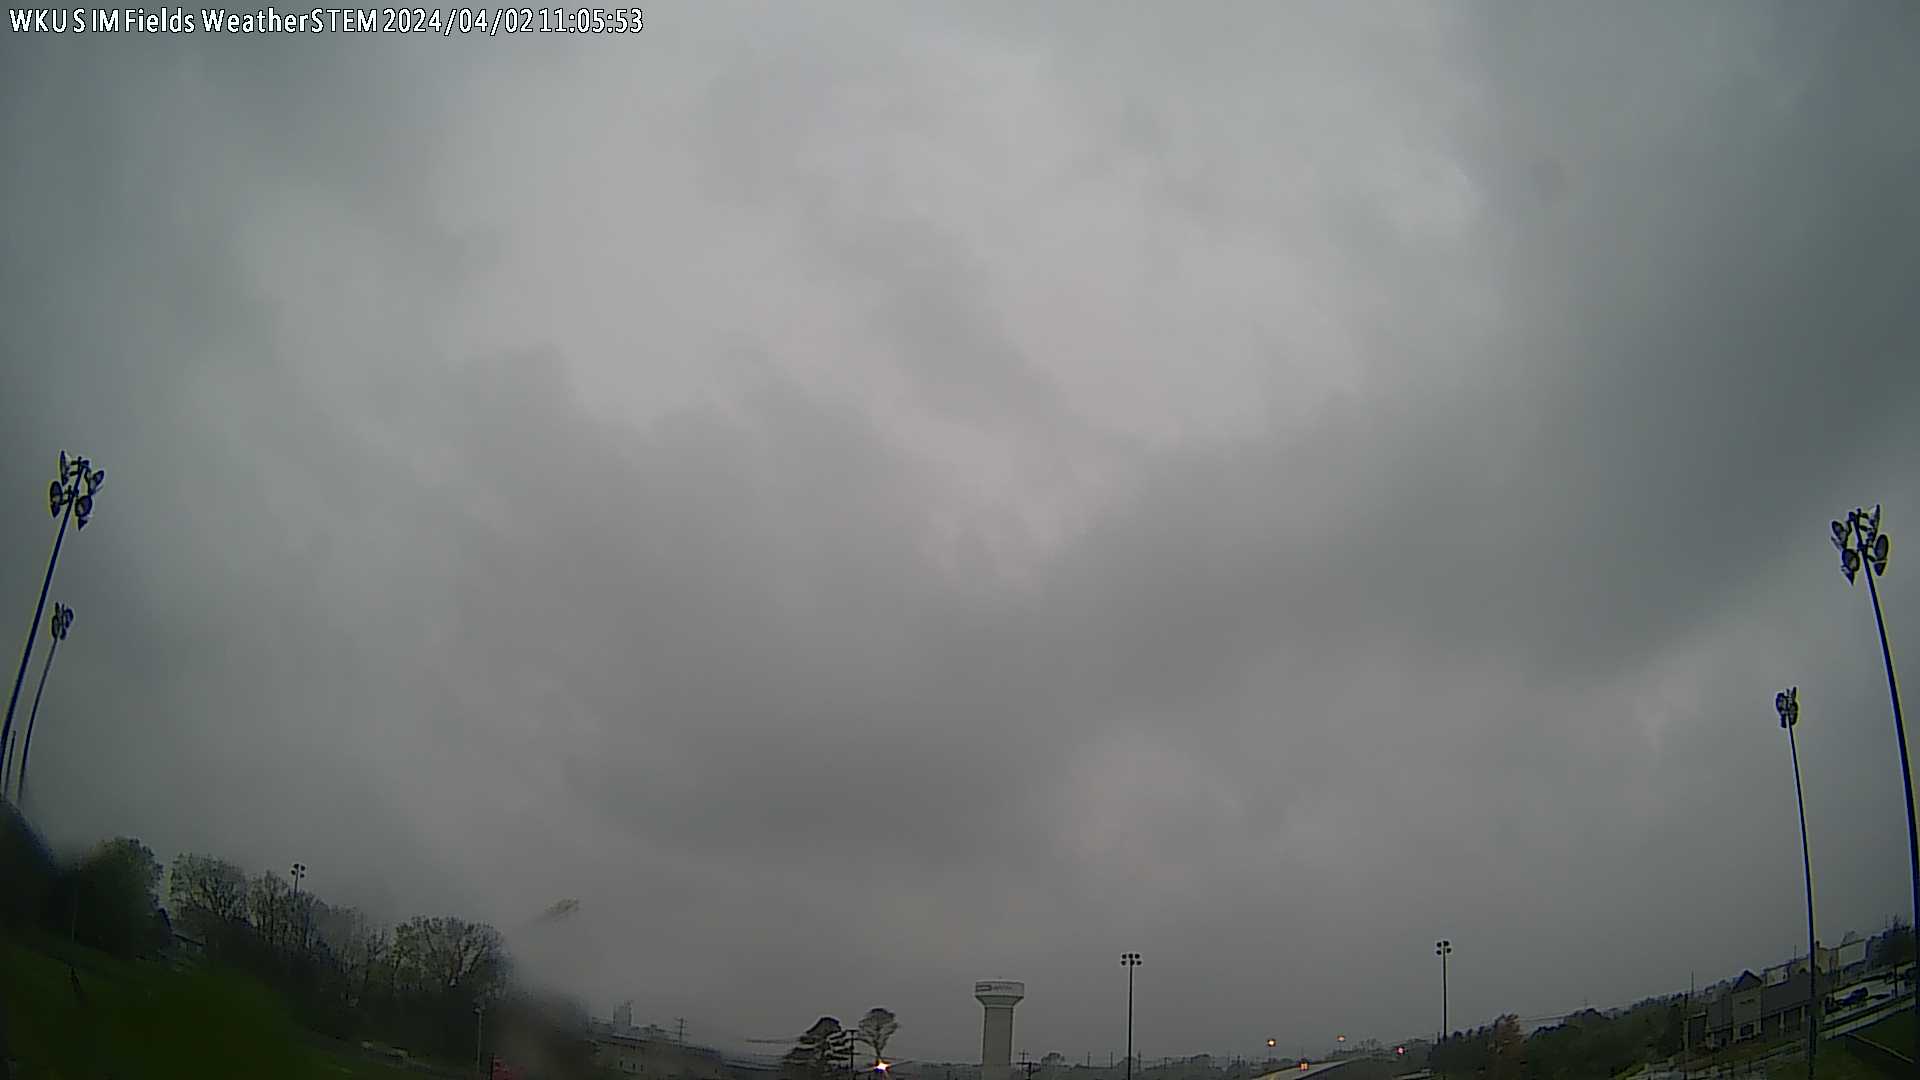 WeatherSTEM Cloud Camera null in Warren County, Kentucky KY at White Squirrel Weather, WKU S Campus IM Field